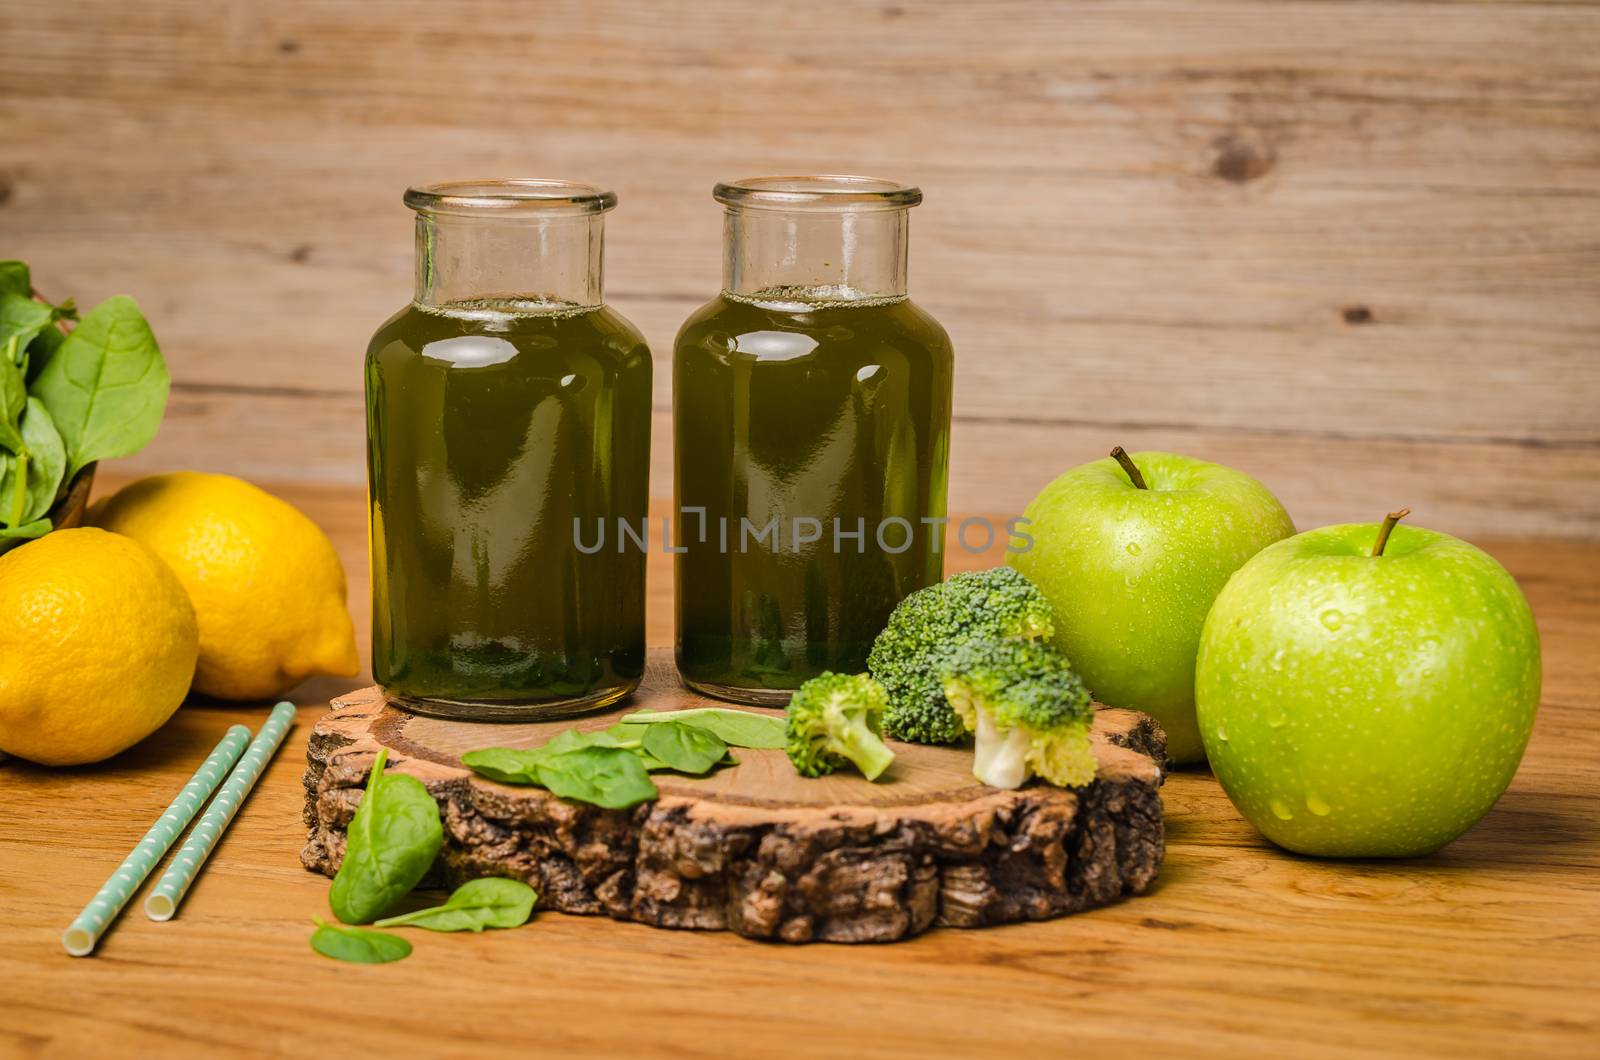 Green fresh leafy greens smoothie in glass jar, spinach leaves, apple, broccoli and lemon. Refreshing healthy drink on wooden table background